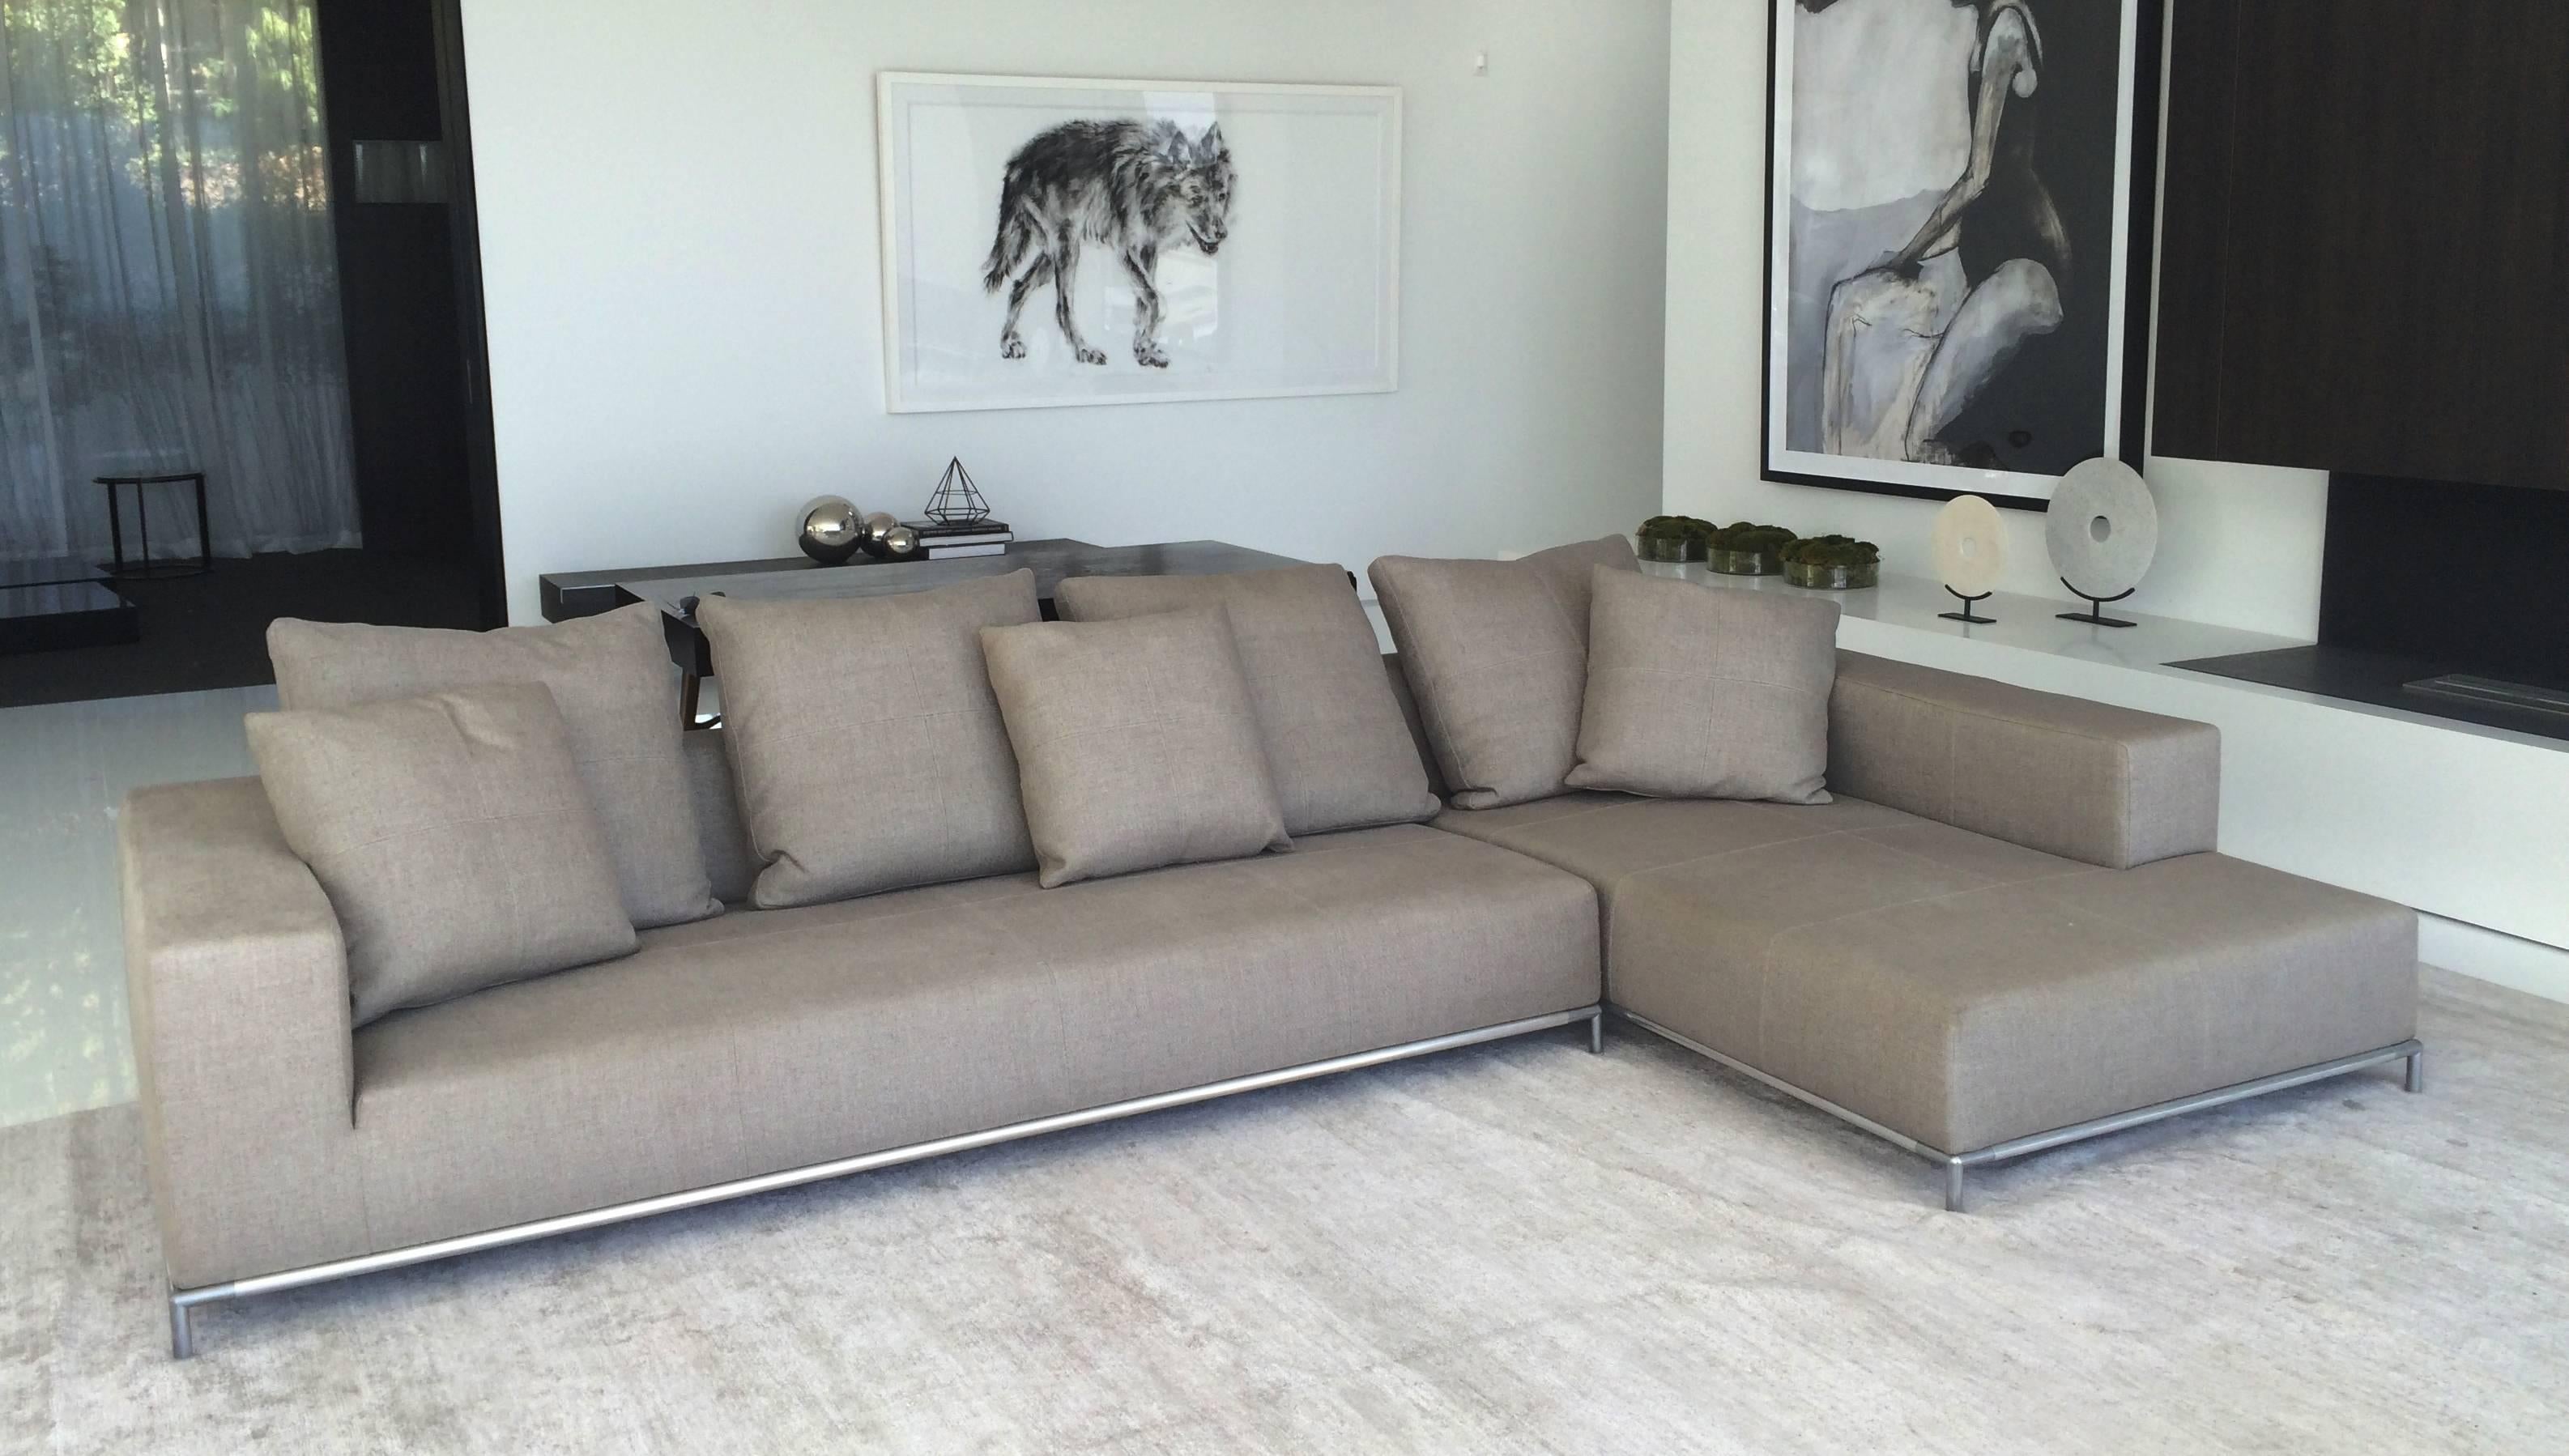 Stunning and beautiful two-piece sectional sofa from the 